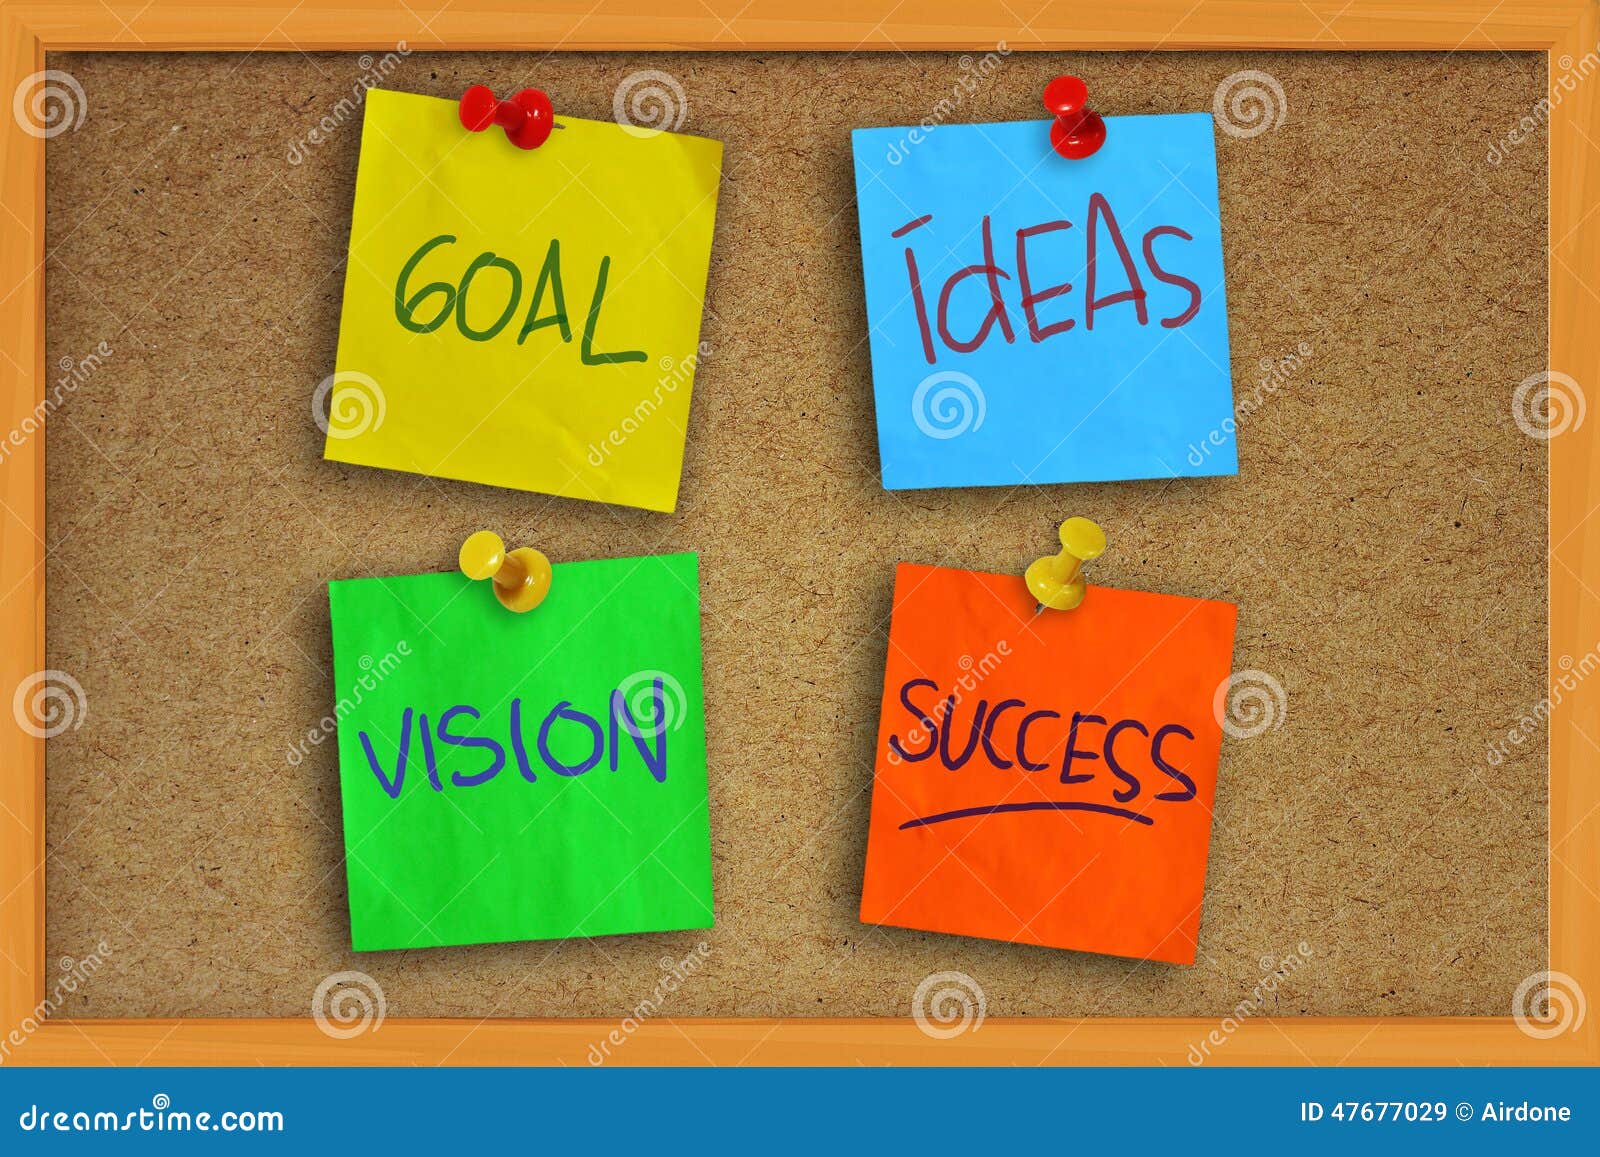 4 660 Goal Vision Board Photos Free Royalty Free Stock Photos From Dreamstime